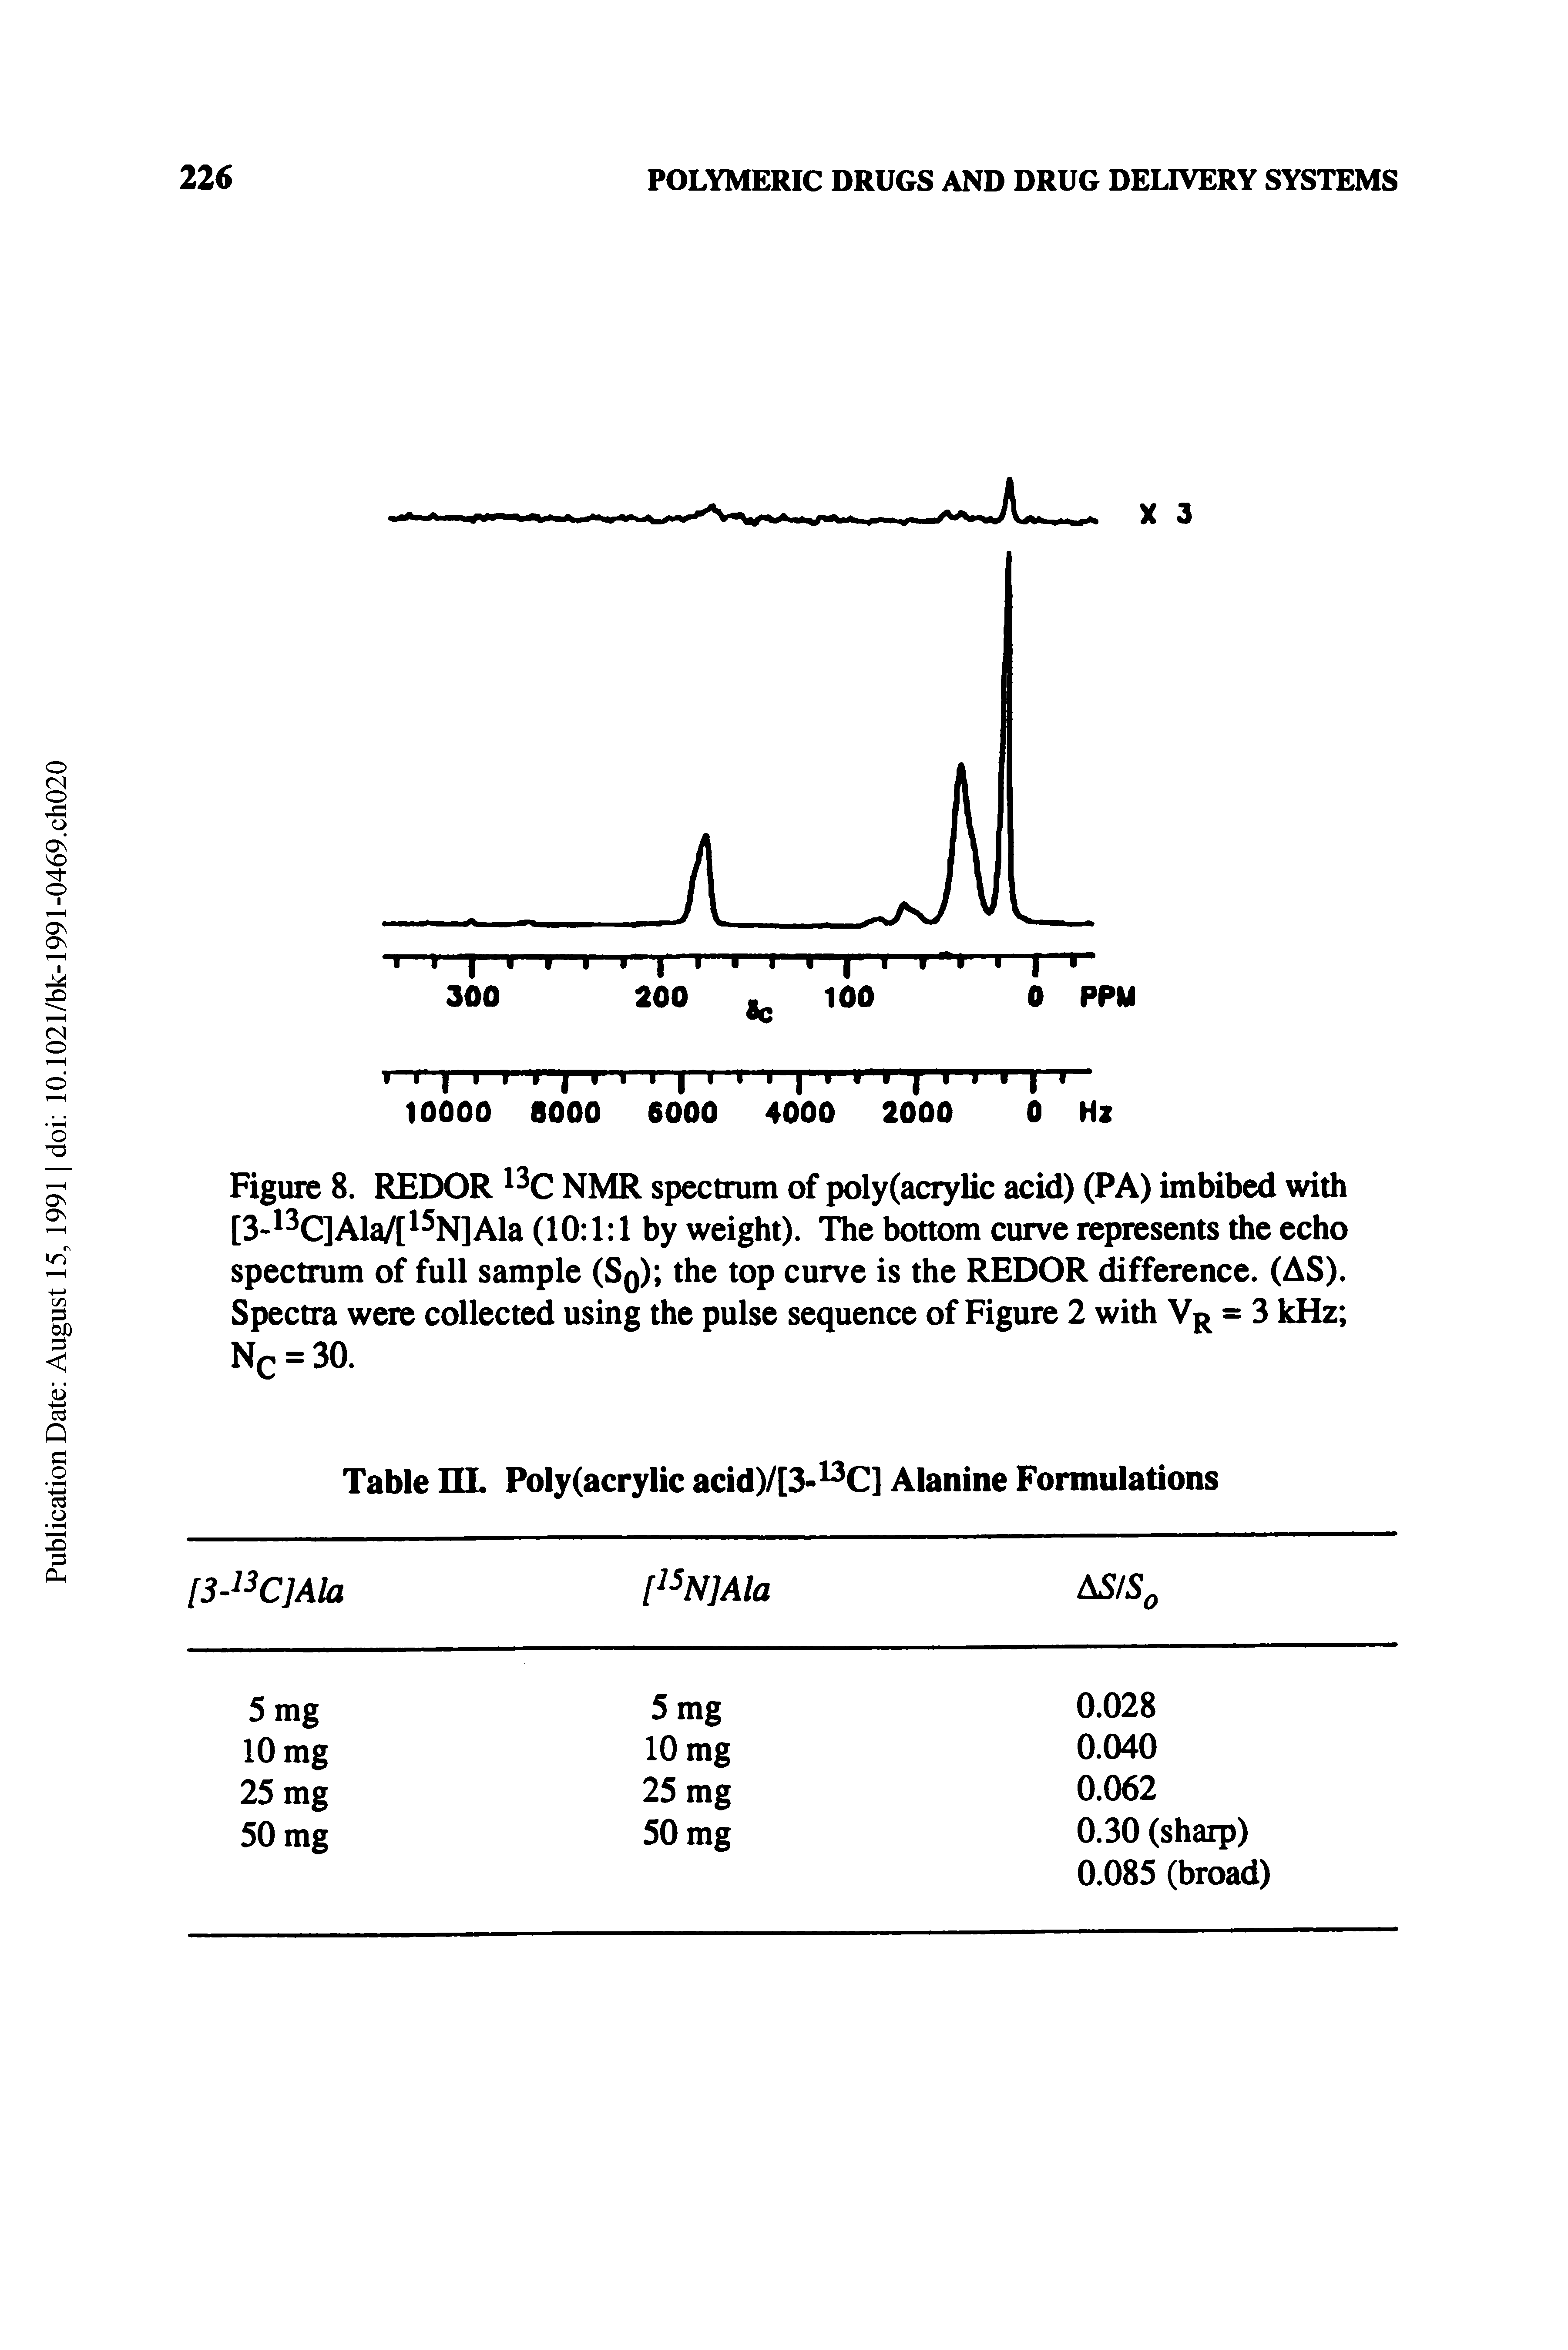 Figure 8. REDOR 13C NMR spectrum of poly(acrylic acid) (PA) imbibed with [3-13C]Ala/[15N]Ala (10 1 1 by weight). The bottom curve represents the echo spectrum of full sample (Sq) the top curve is the REDOR difference. (AS). Spectra were collected using the pulse sequence of Figure 2 with VR = 3 kHz Nc = 30.